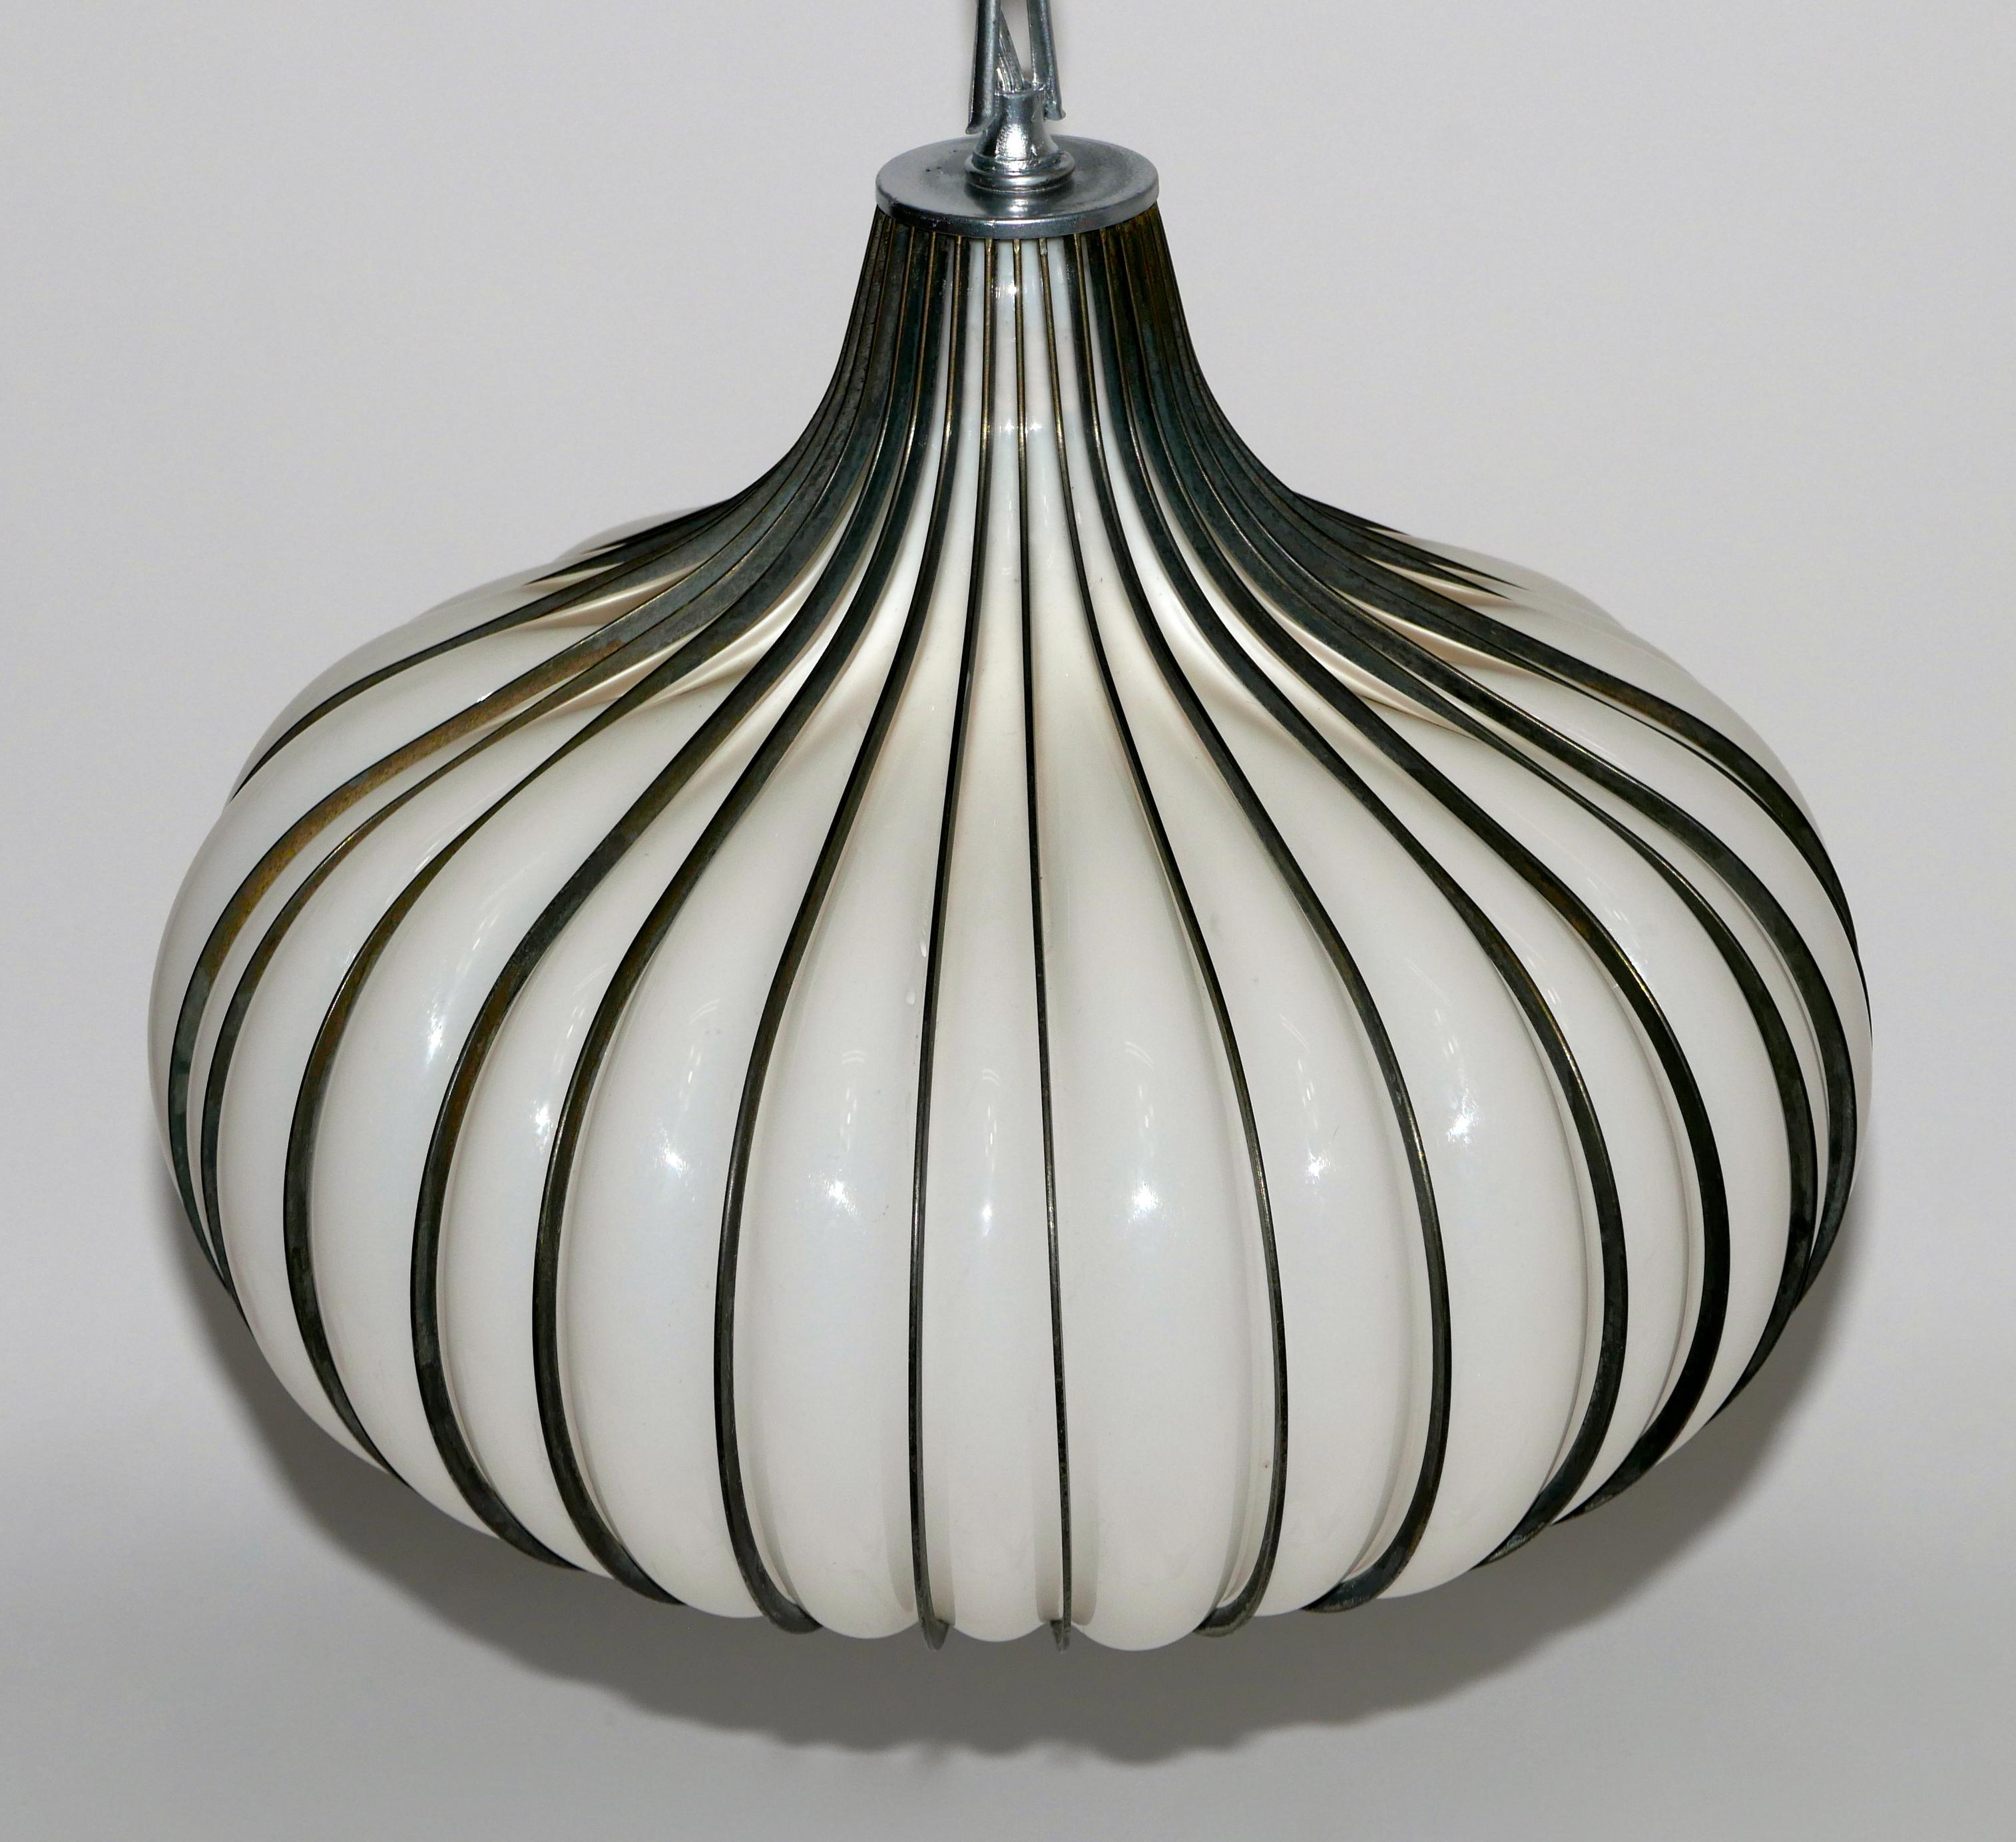 A Hollywood Regency / California modern hanging pendant. Hand blown onion form white glass with a ribbed brass plated steel frame, long swag chain and canopy. Chain measures 48 inches. Can be shortened if requested.

Midcentury
Lightcraft of